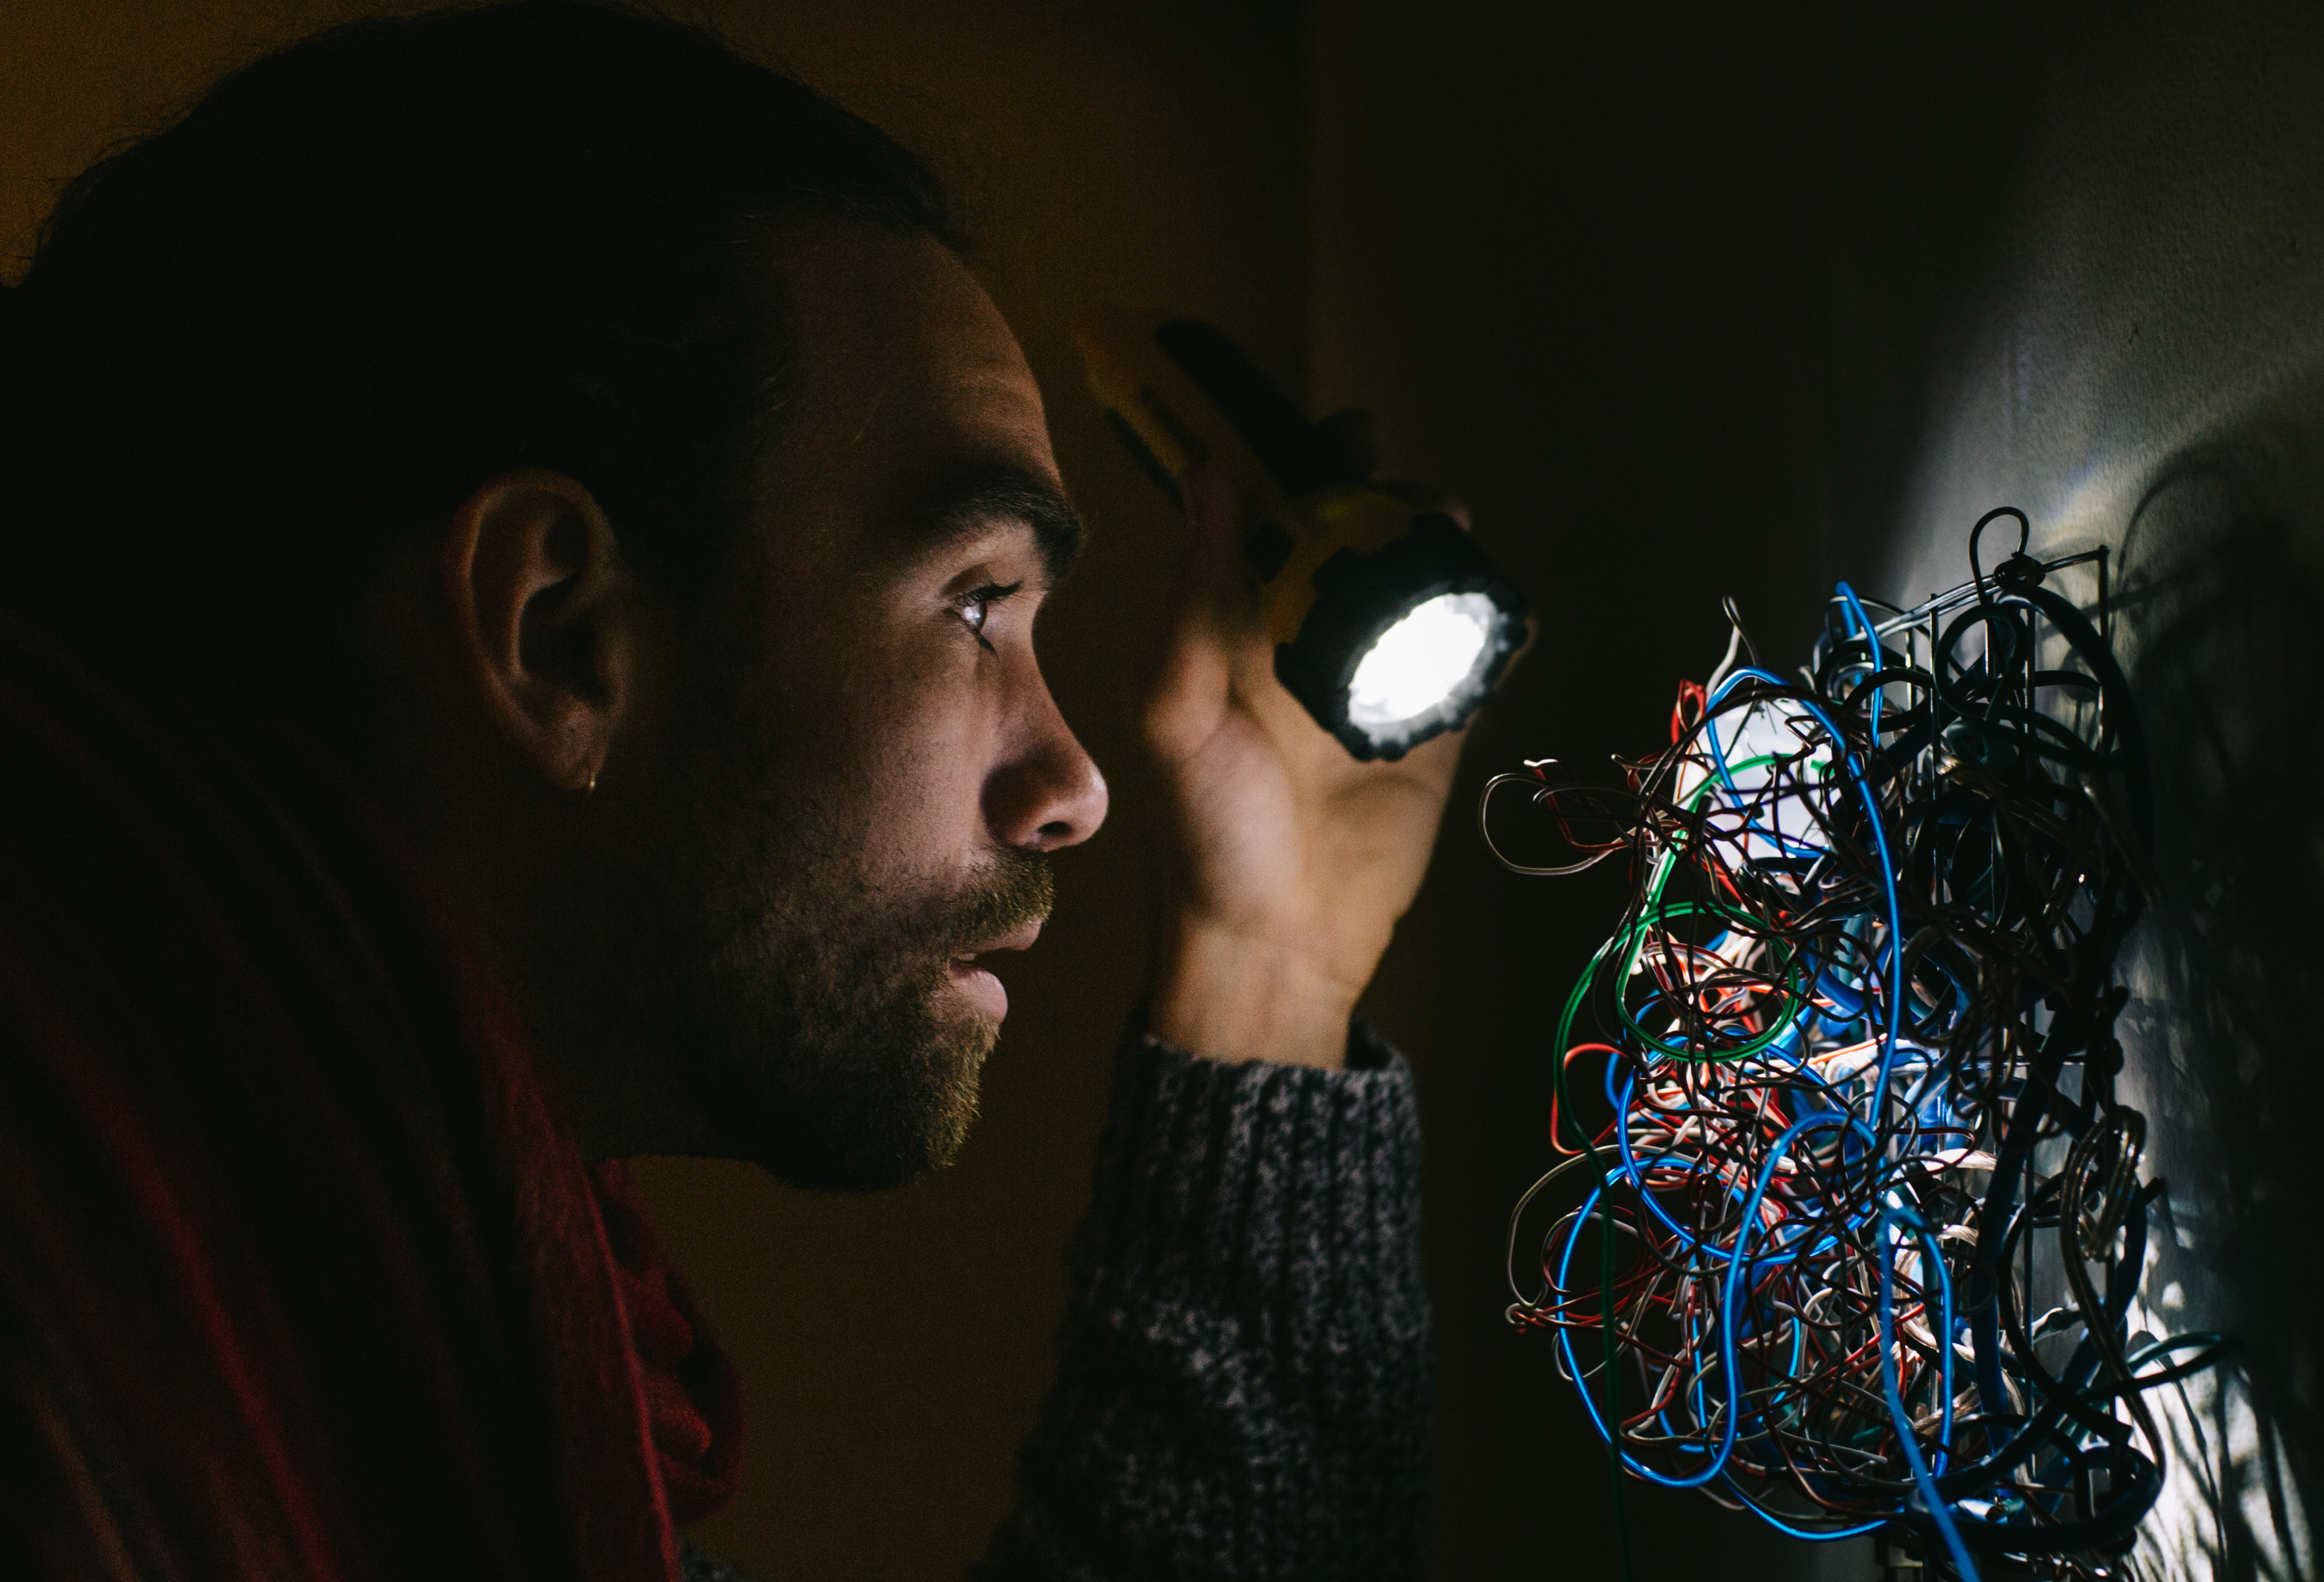 A UW student triggers one section of the tangled wire display